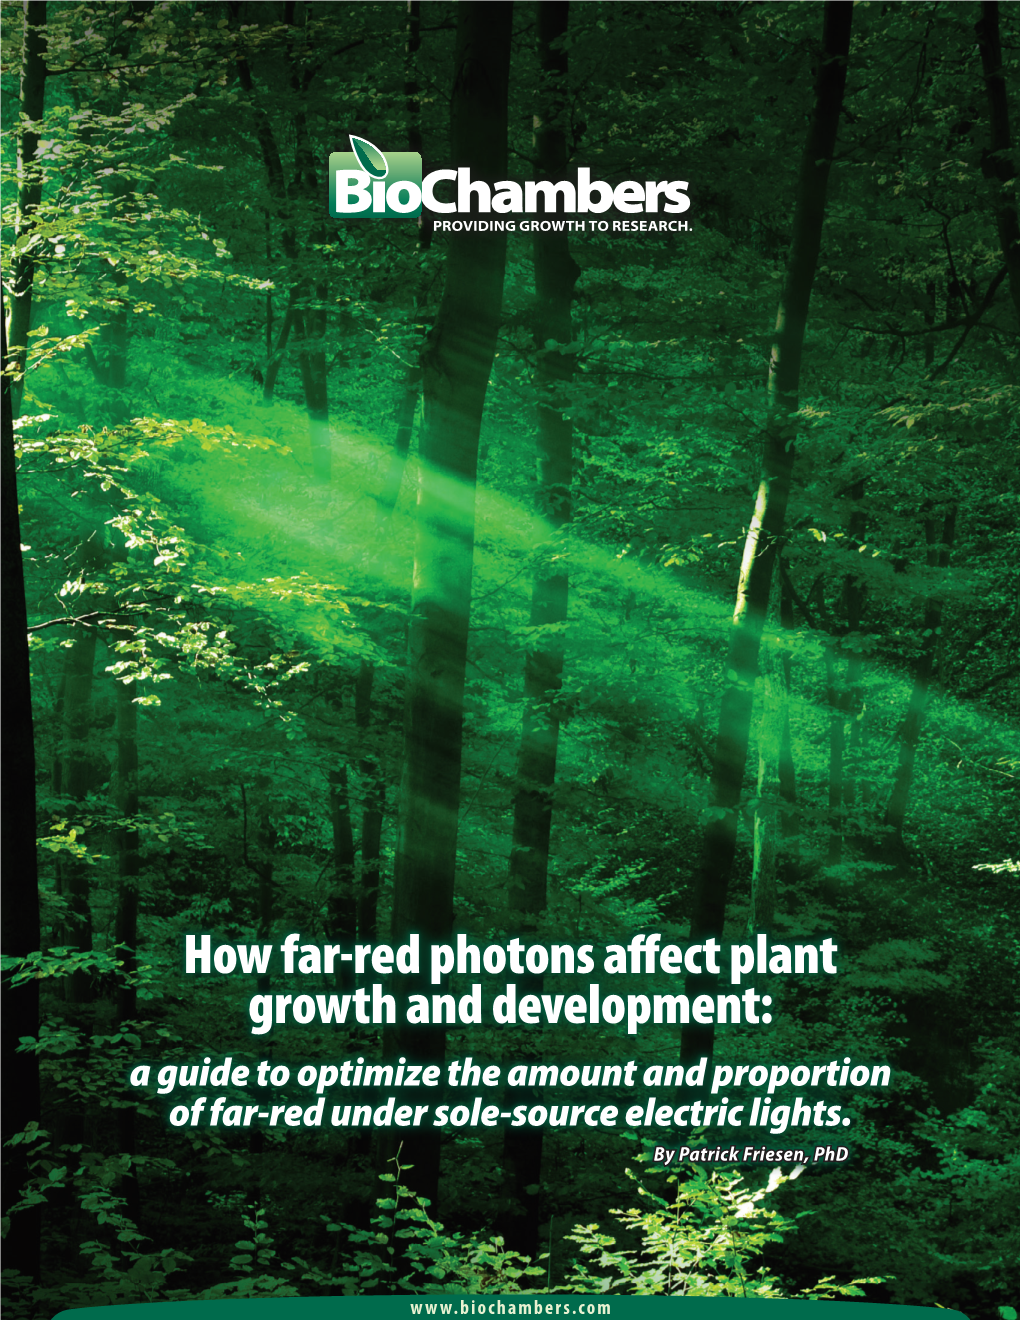 Far-Red Photons Affect Plant Growth and Development: a Guide to Optimize the Amount and Proportion of Far-Red Under Sole-Source Electric Lights